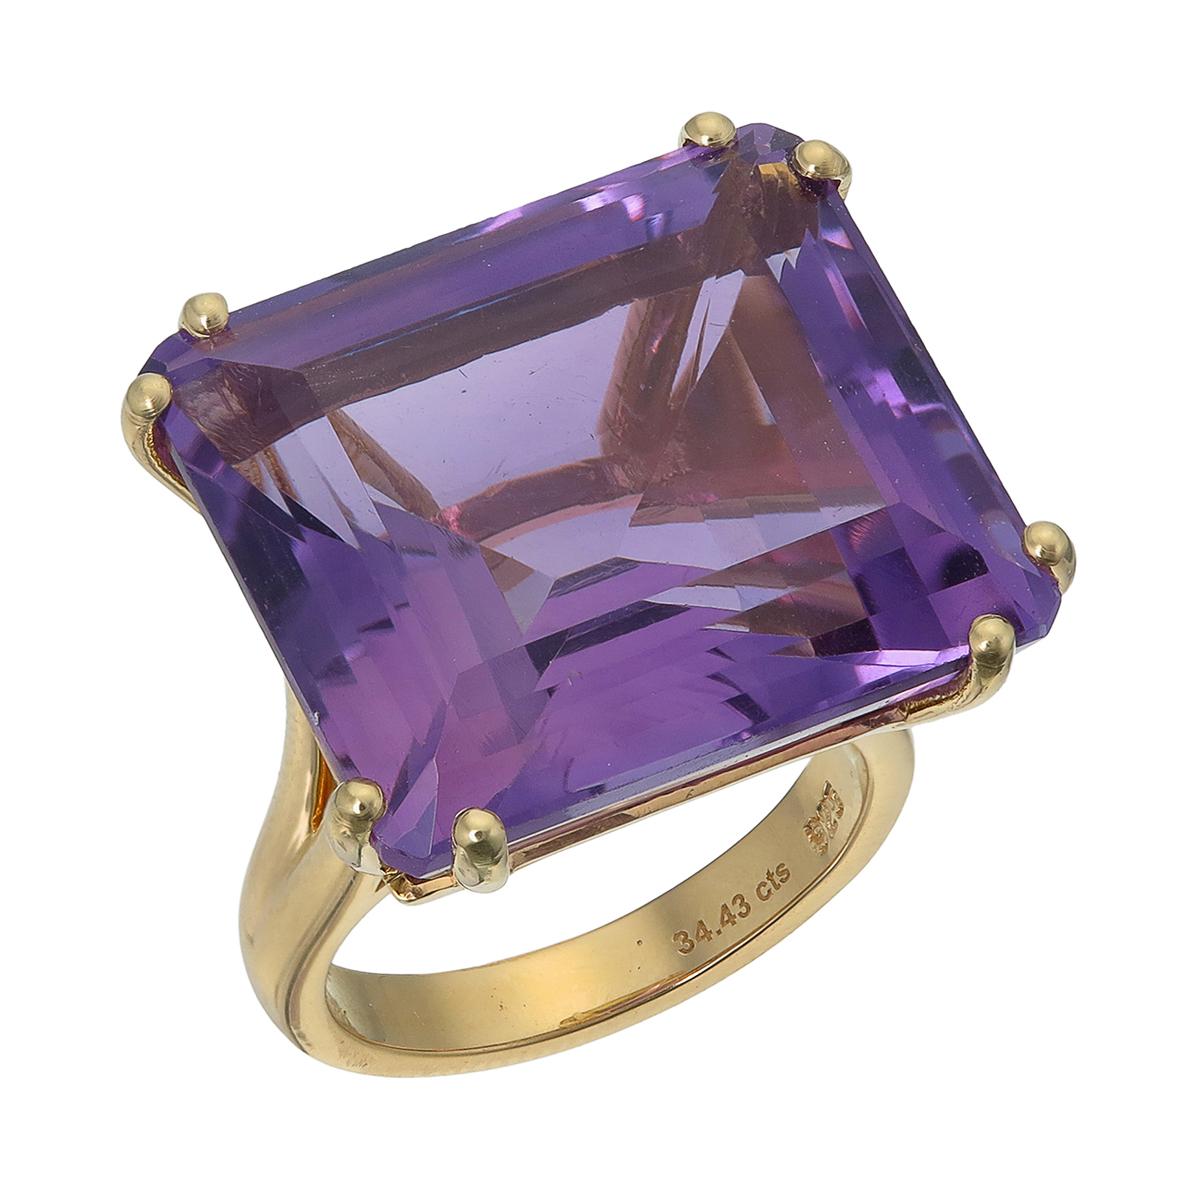 Orloff of Denmark; 18 Karat Gold-Plated Sterling Silver Amethyst Cocktail Ring.

Introducing a striking statement ring crafted in 925 silver and later plated in stunning 18 Karat gold. 
Rising from the center is a captivating 34 carat Amethyst hold